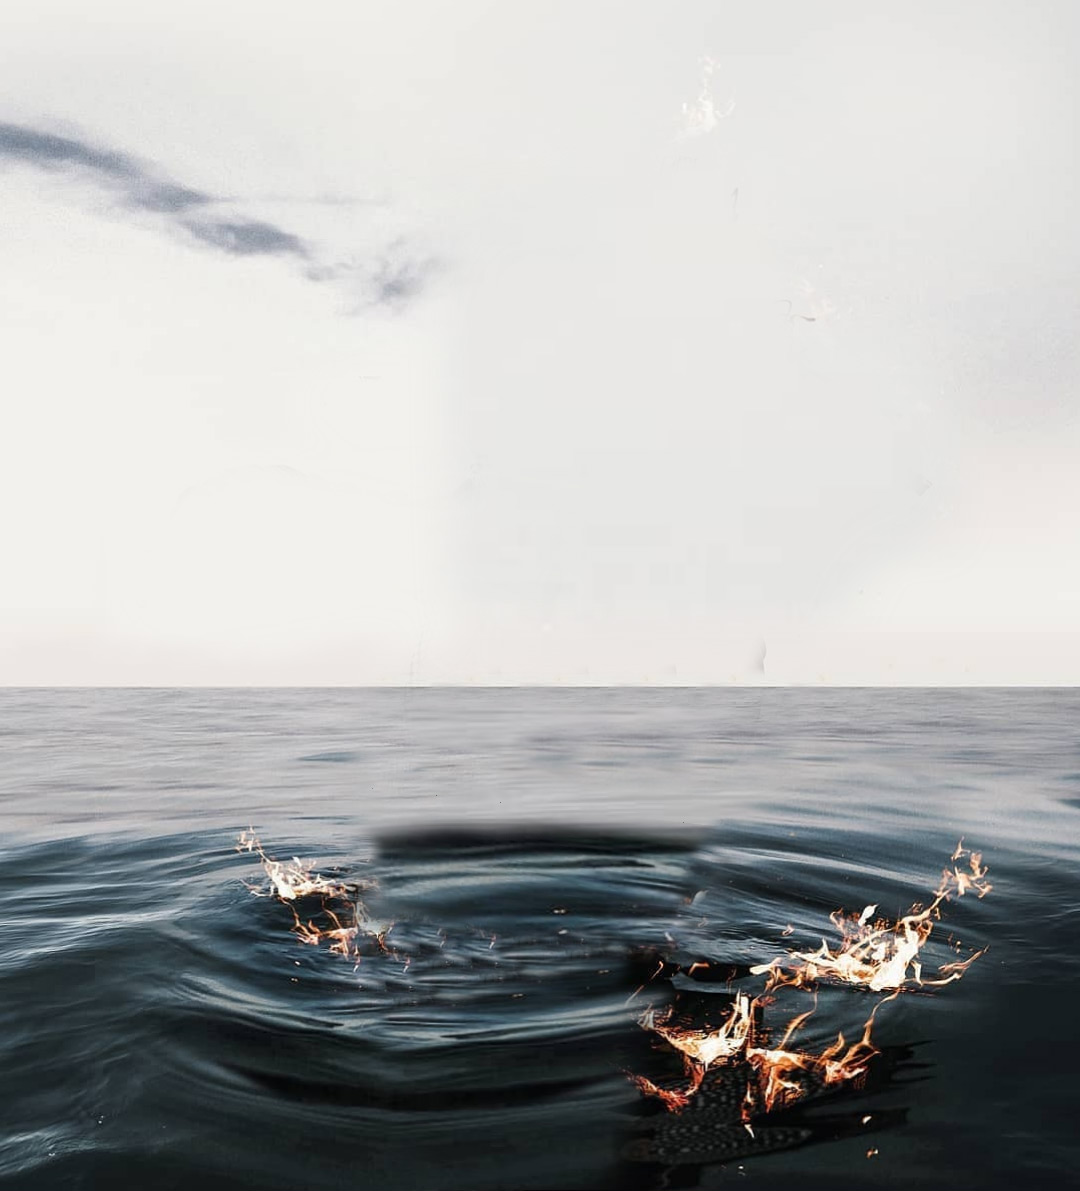 Fire In Water PicsArt Background Free Stock Image